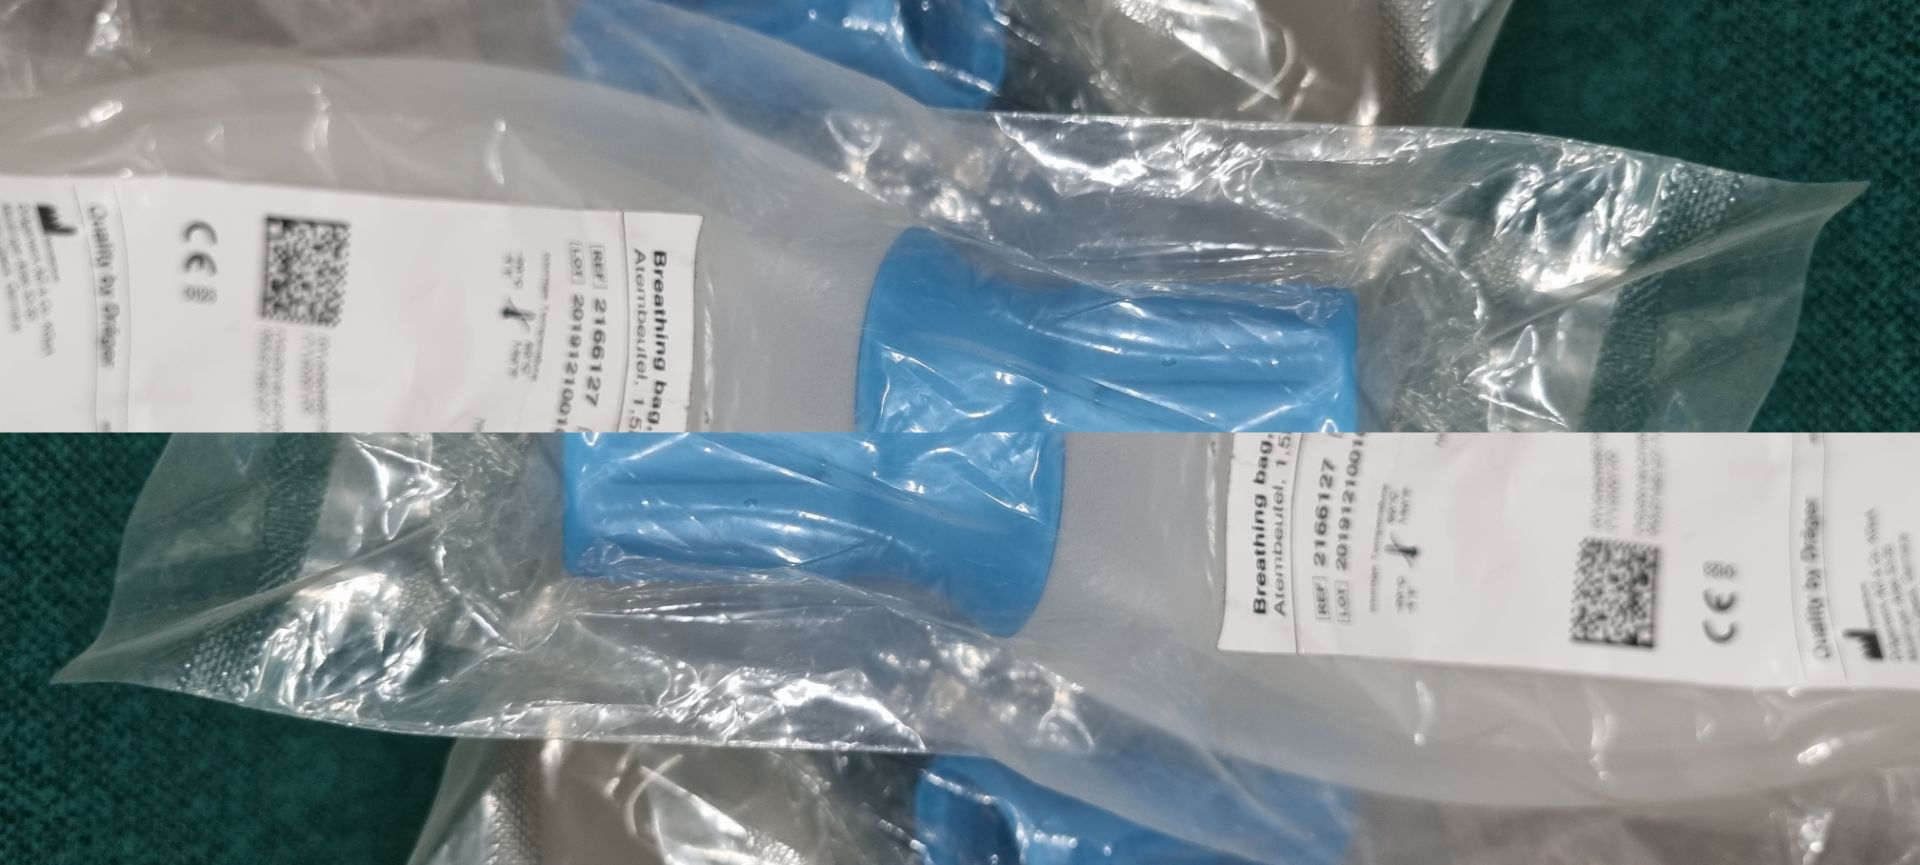 10 x Drager Breathing Bags 1.5 Litre Silicon - Image 2 of 3